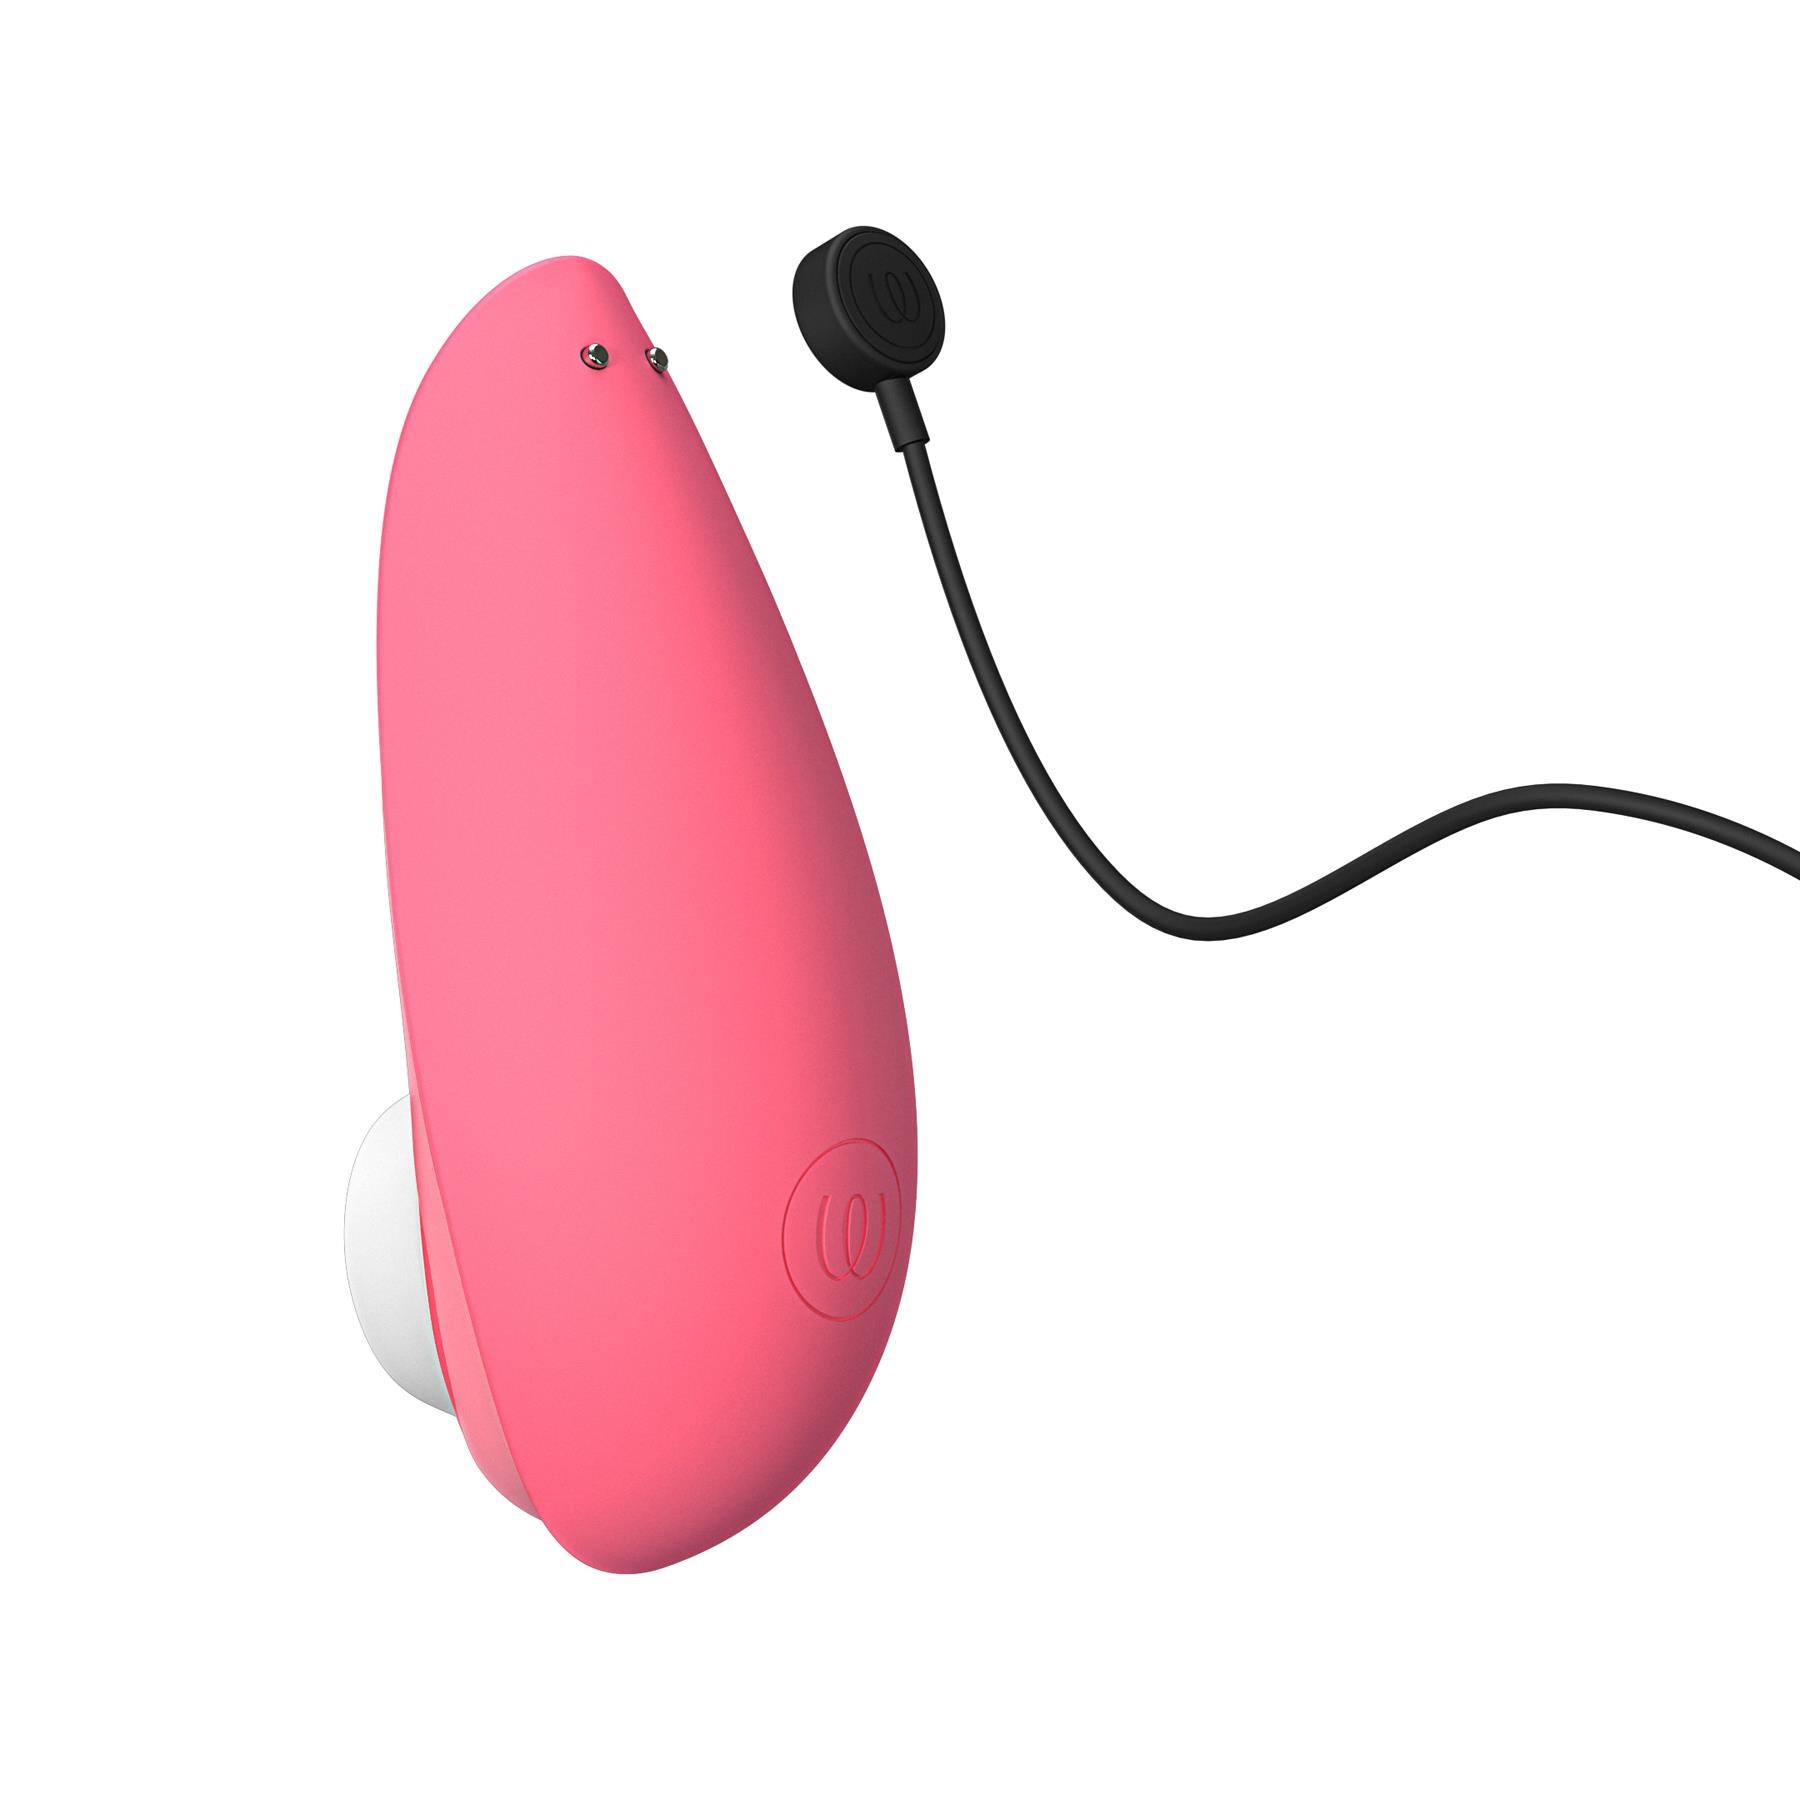 Womanizer Liberty 2 Pleasure Air Clitoral Stimulator- Showing Where Charging Cable is Placed